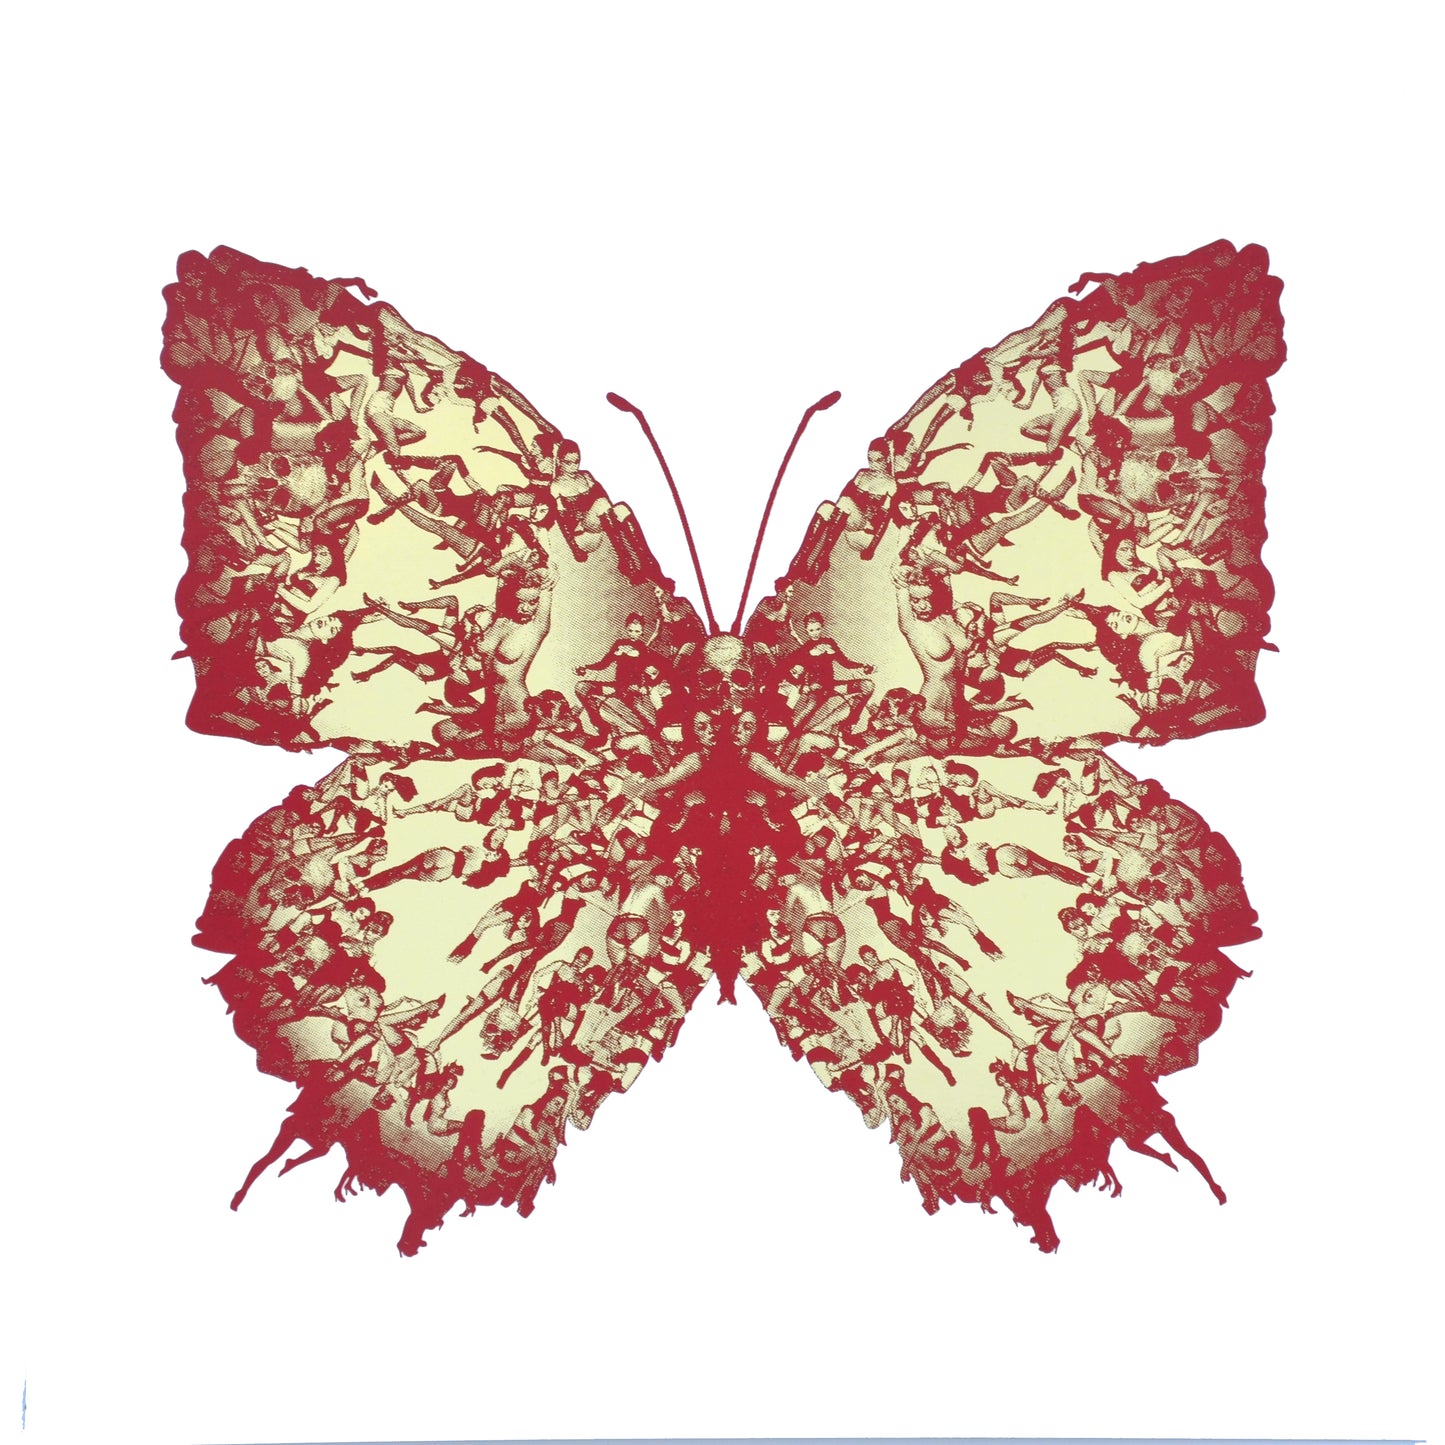 Cassandra-Yap-TAP-Galleries-Deliverance-Mini-Gold-Scarlet-Limited-Edition-Red-Gold-Butterfly